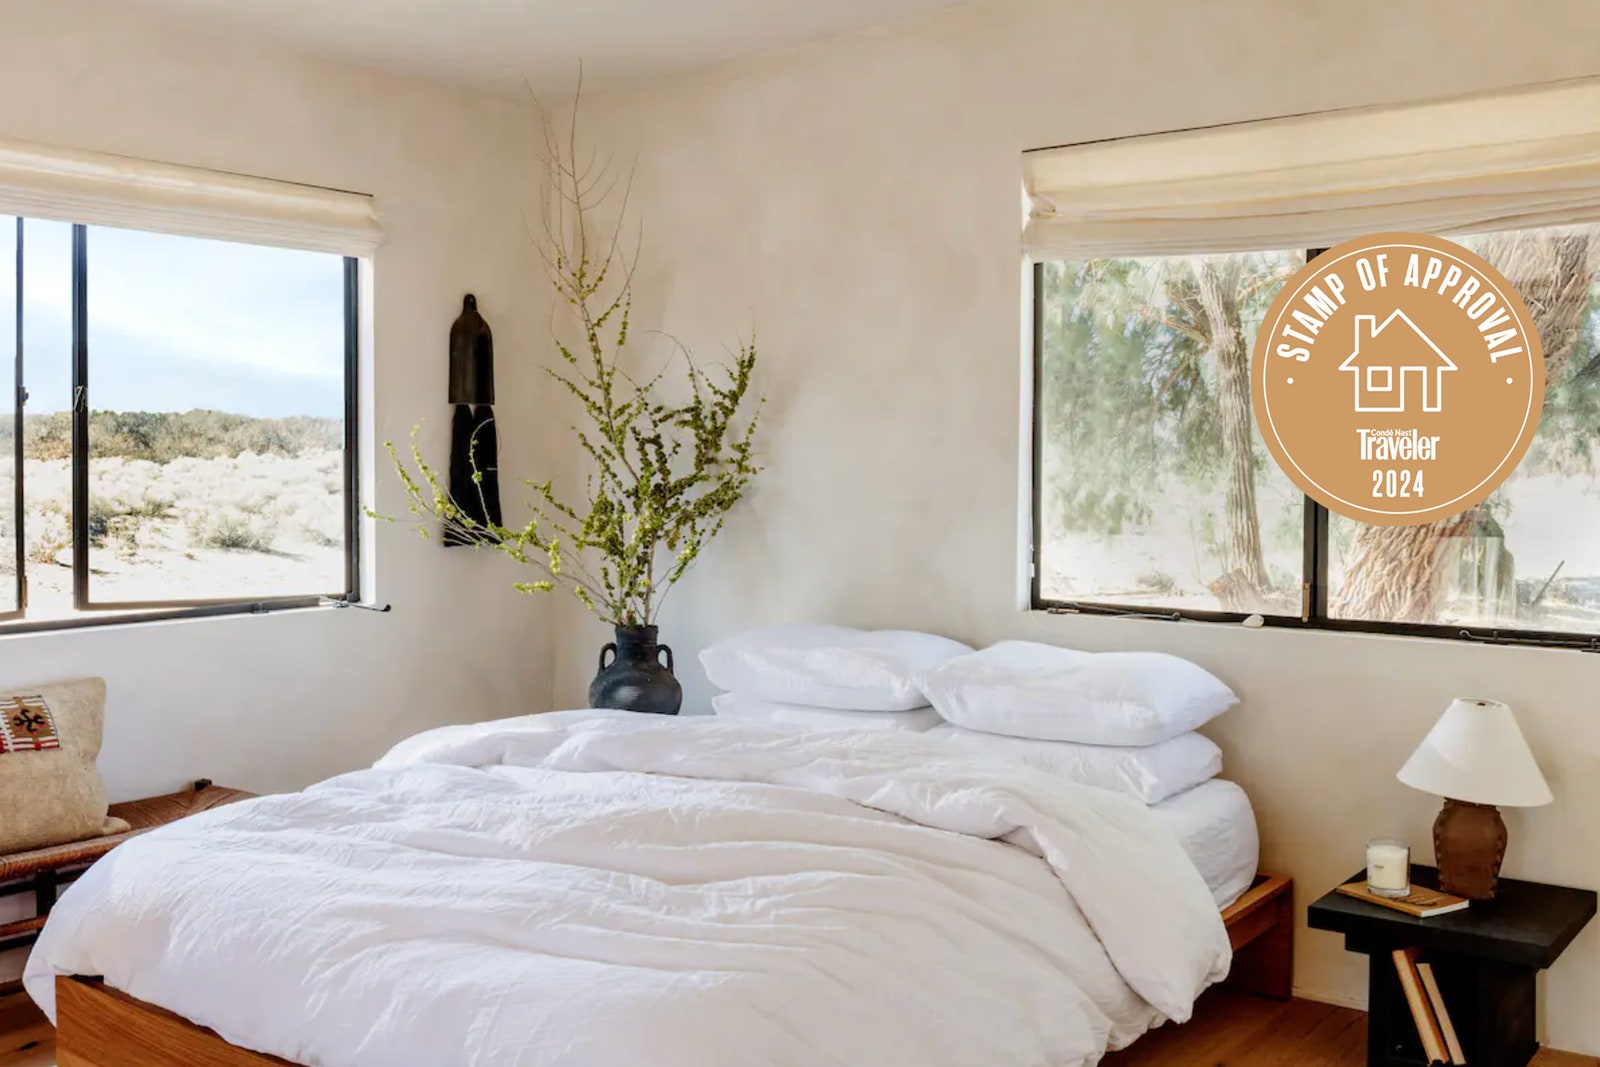 My Favorite Airbnb: A Desert Abode on 10 Acres Outside Joshua Tree